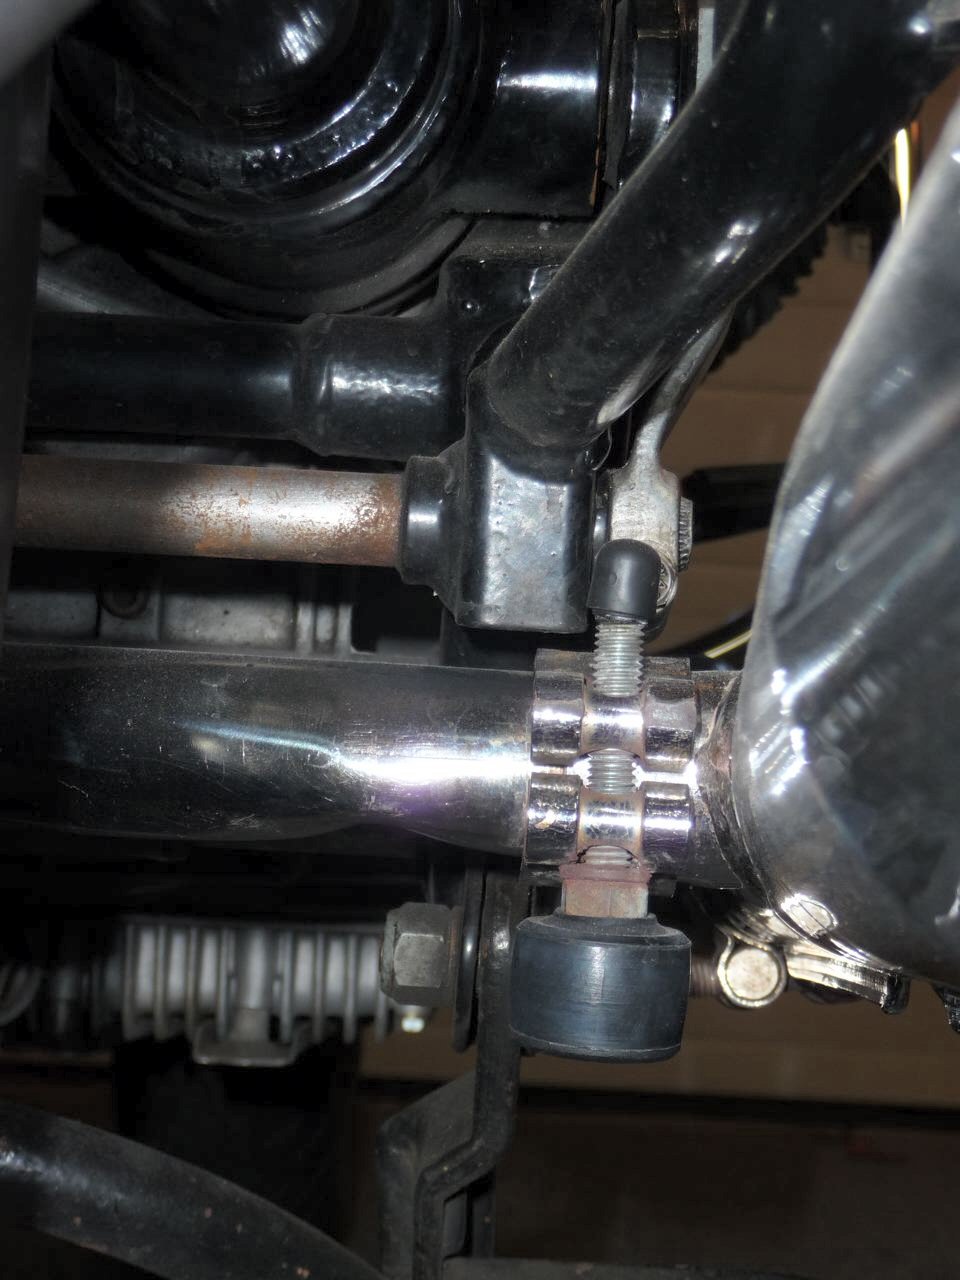 Using the clamp on the crossover pipe as a center stand stop tab for Moto Guzzi V700, V7 Special, Ambassador, 850 GT, 850 GT California, Eldorado, and 850 California Police models.